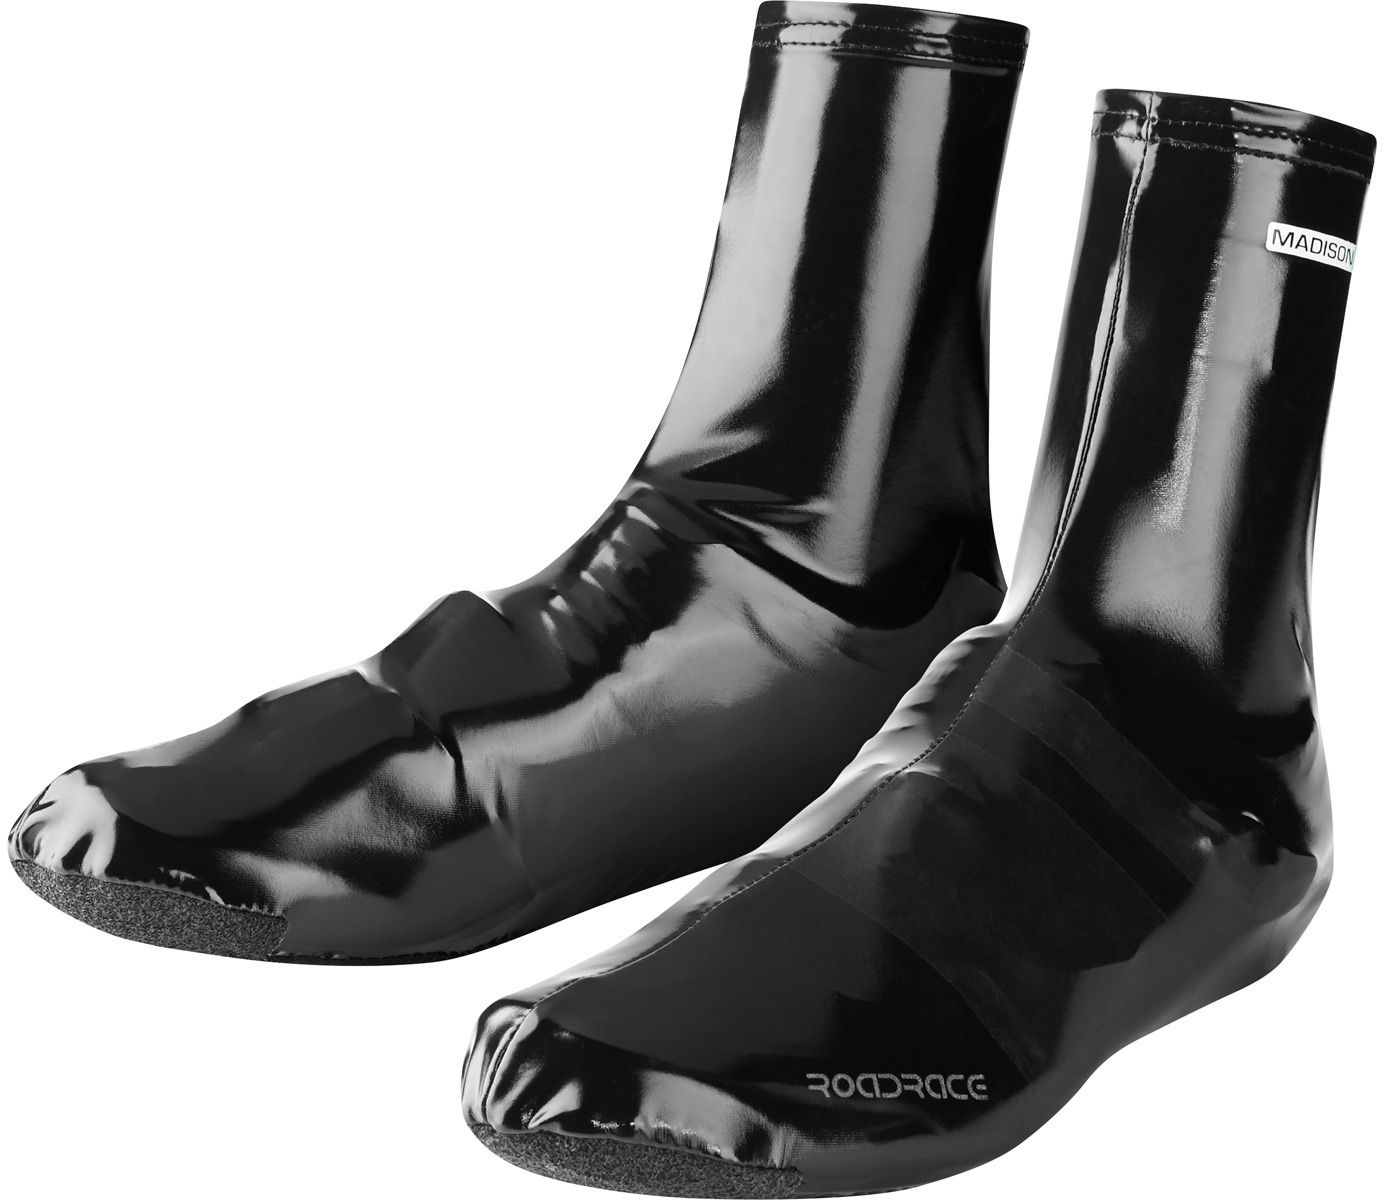 Madison Roadrace PU Lycra Aero Overshoes Small Only - £6.8 | Overshoes ...